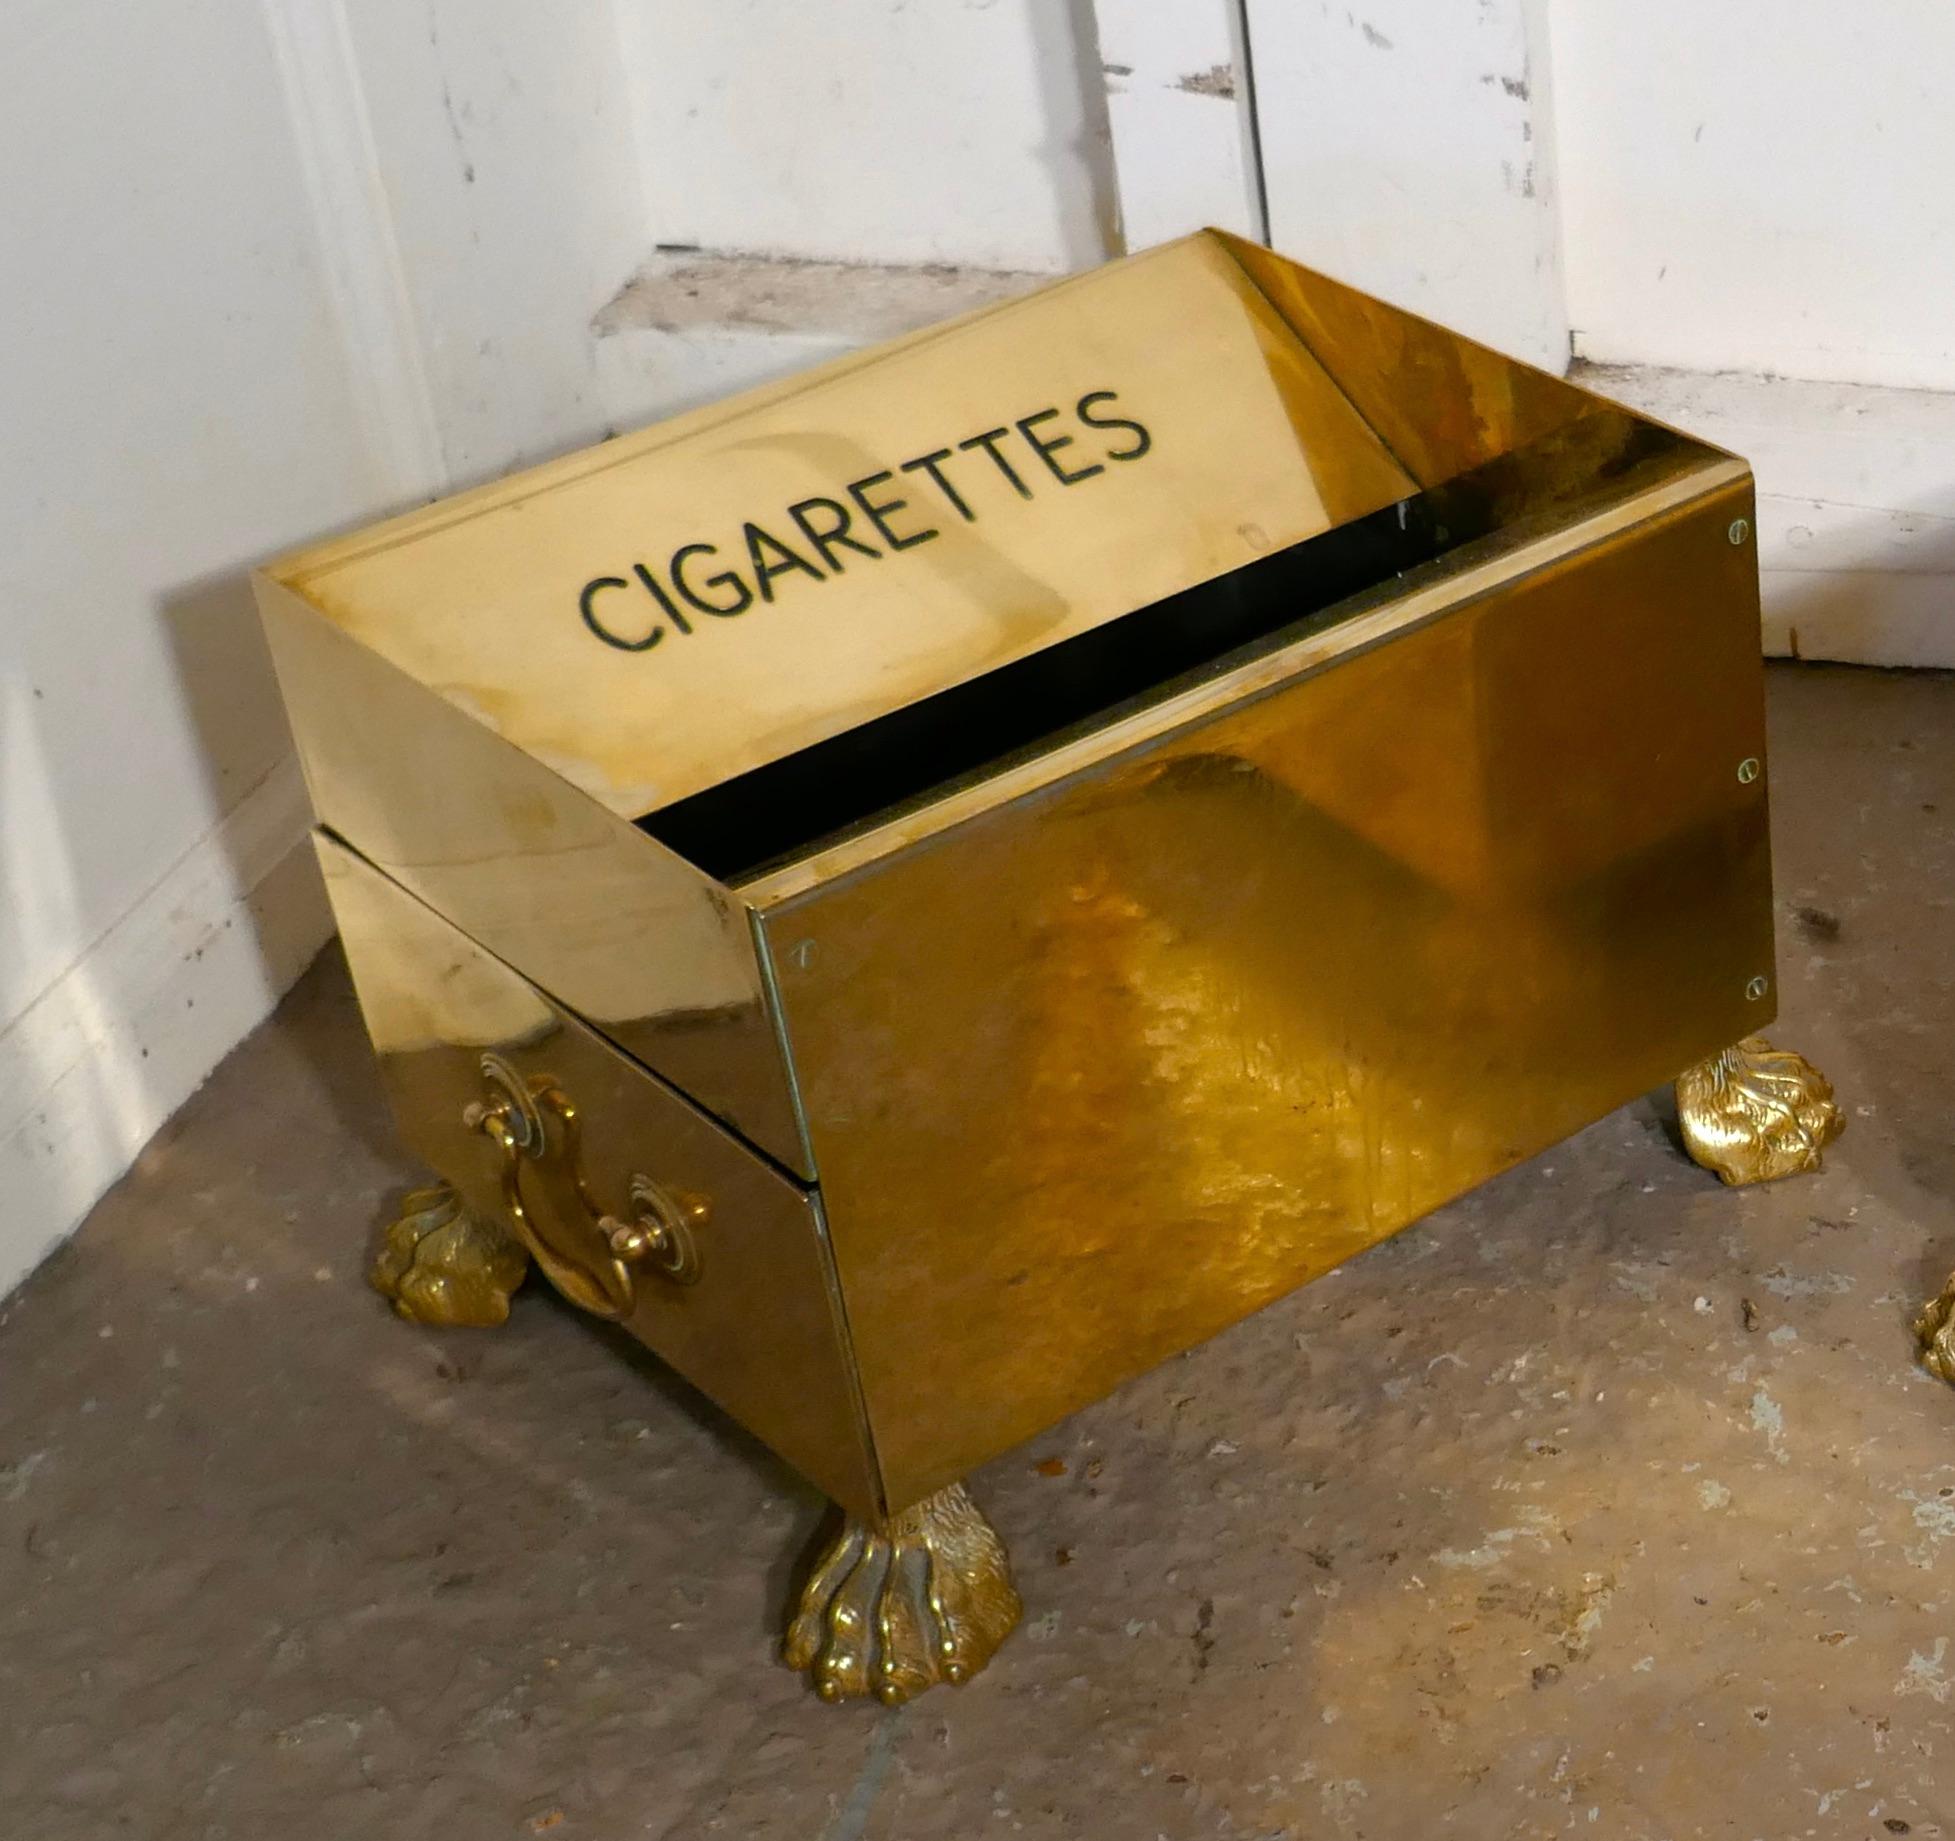 Art Deco vintage brass hotel floor ashtray

A rare solid brass floor ashtray, the tray has CIGARETTES embossed on one side, it stands on lions paw feet and has an ash pan drawer on the side for ease of emptying

A Design Classic of their time, and